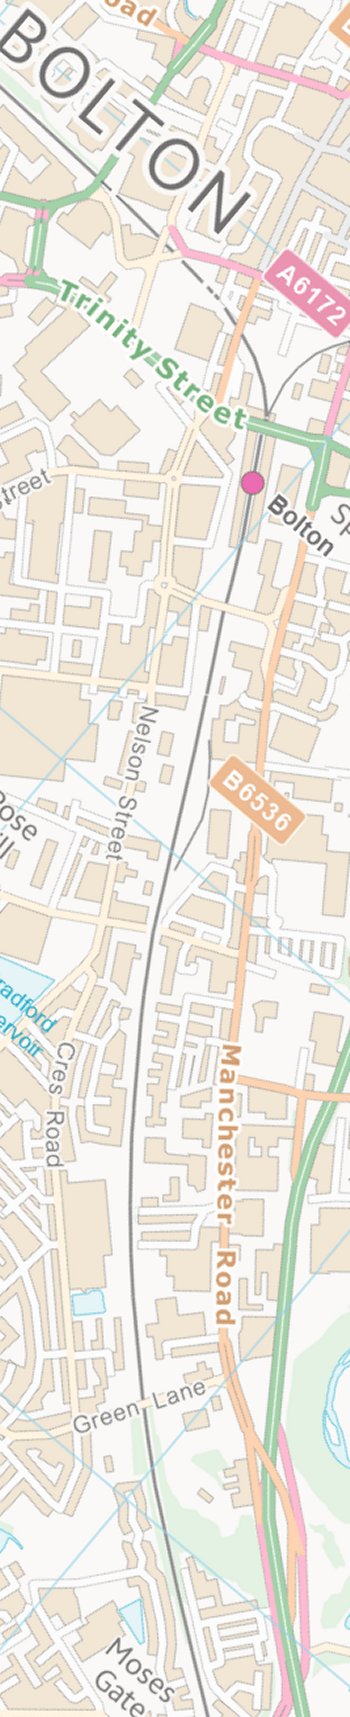 Section from the Ordnance Survey OpenSource mapping 2013 showing L&YR railway line from Bolton Trinity Street to Moses Gate railway station